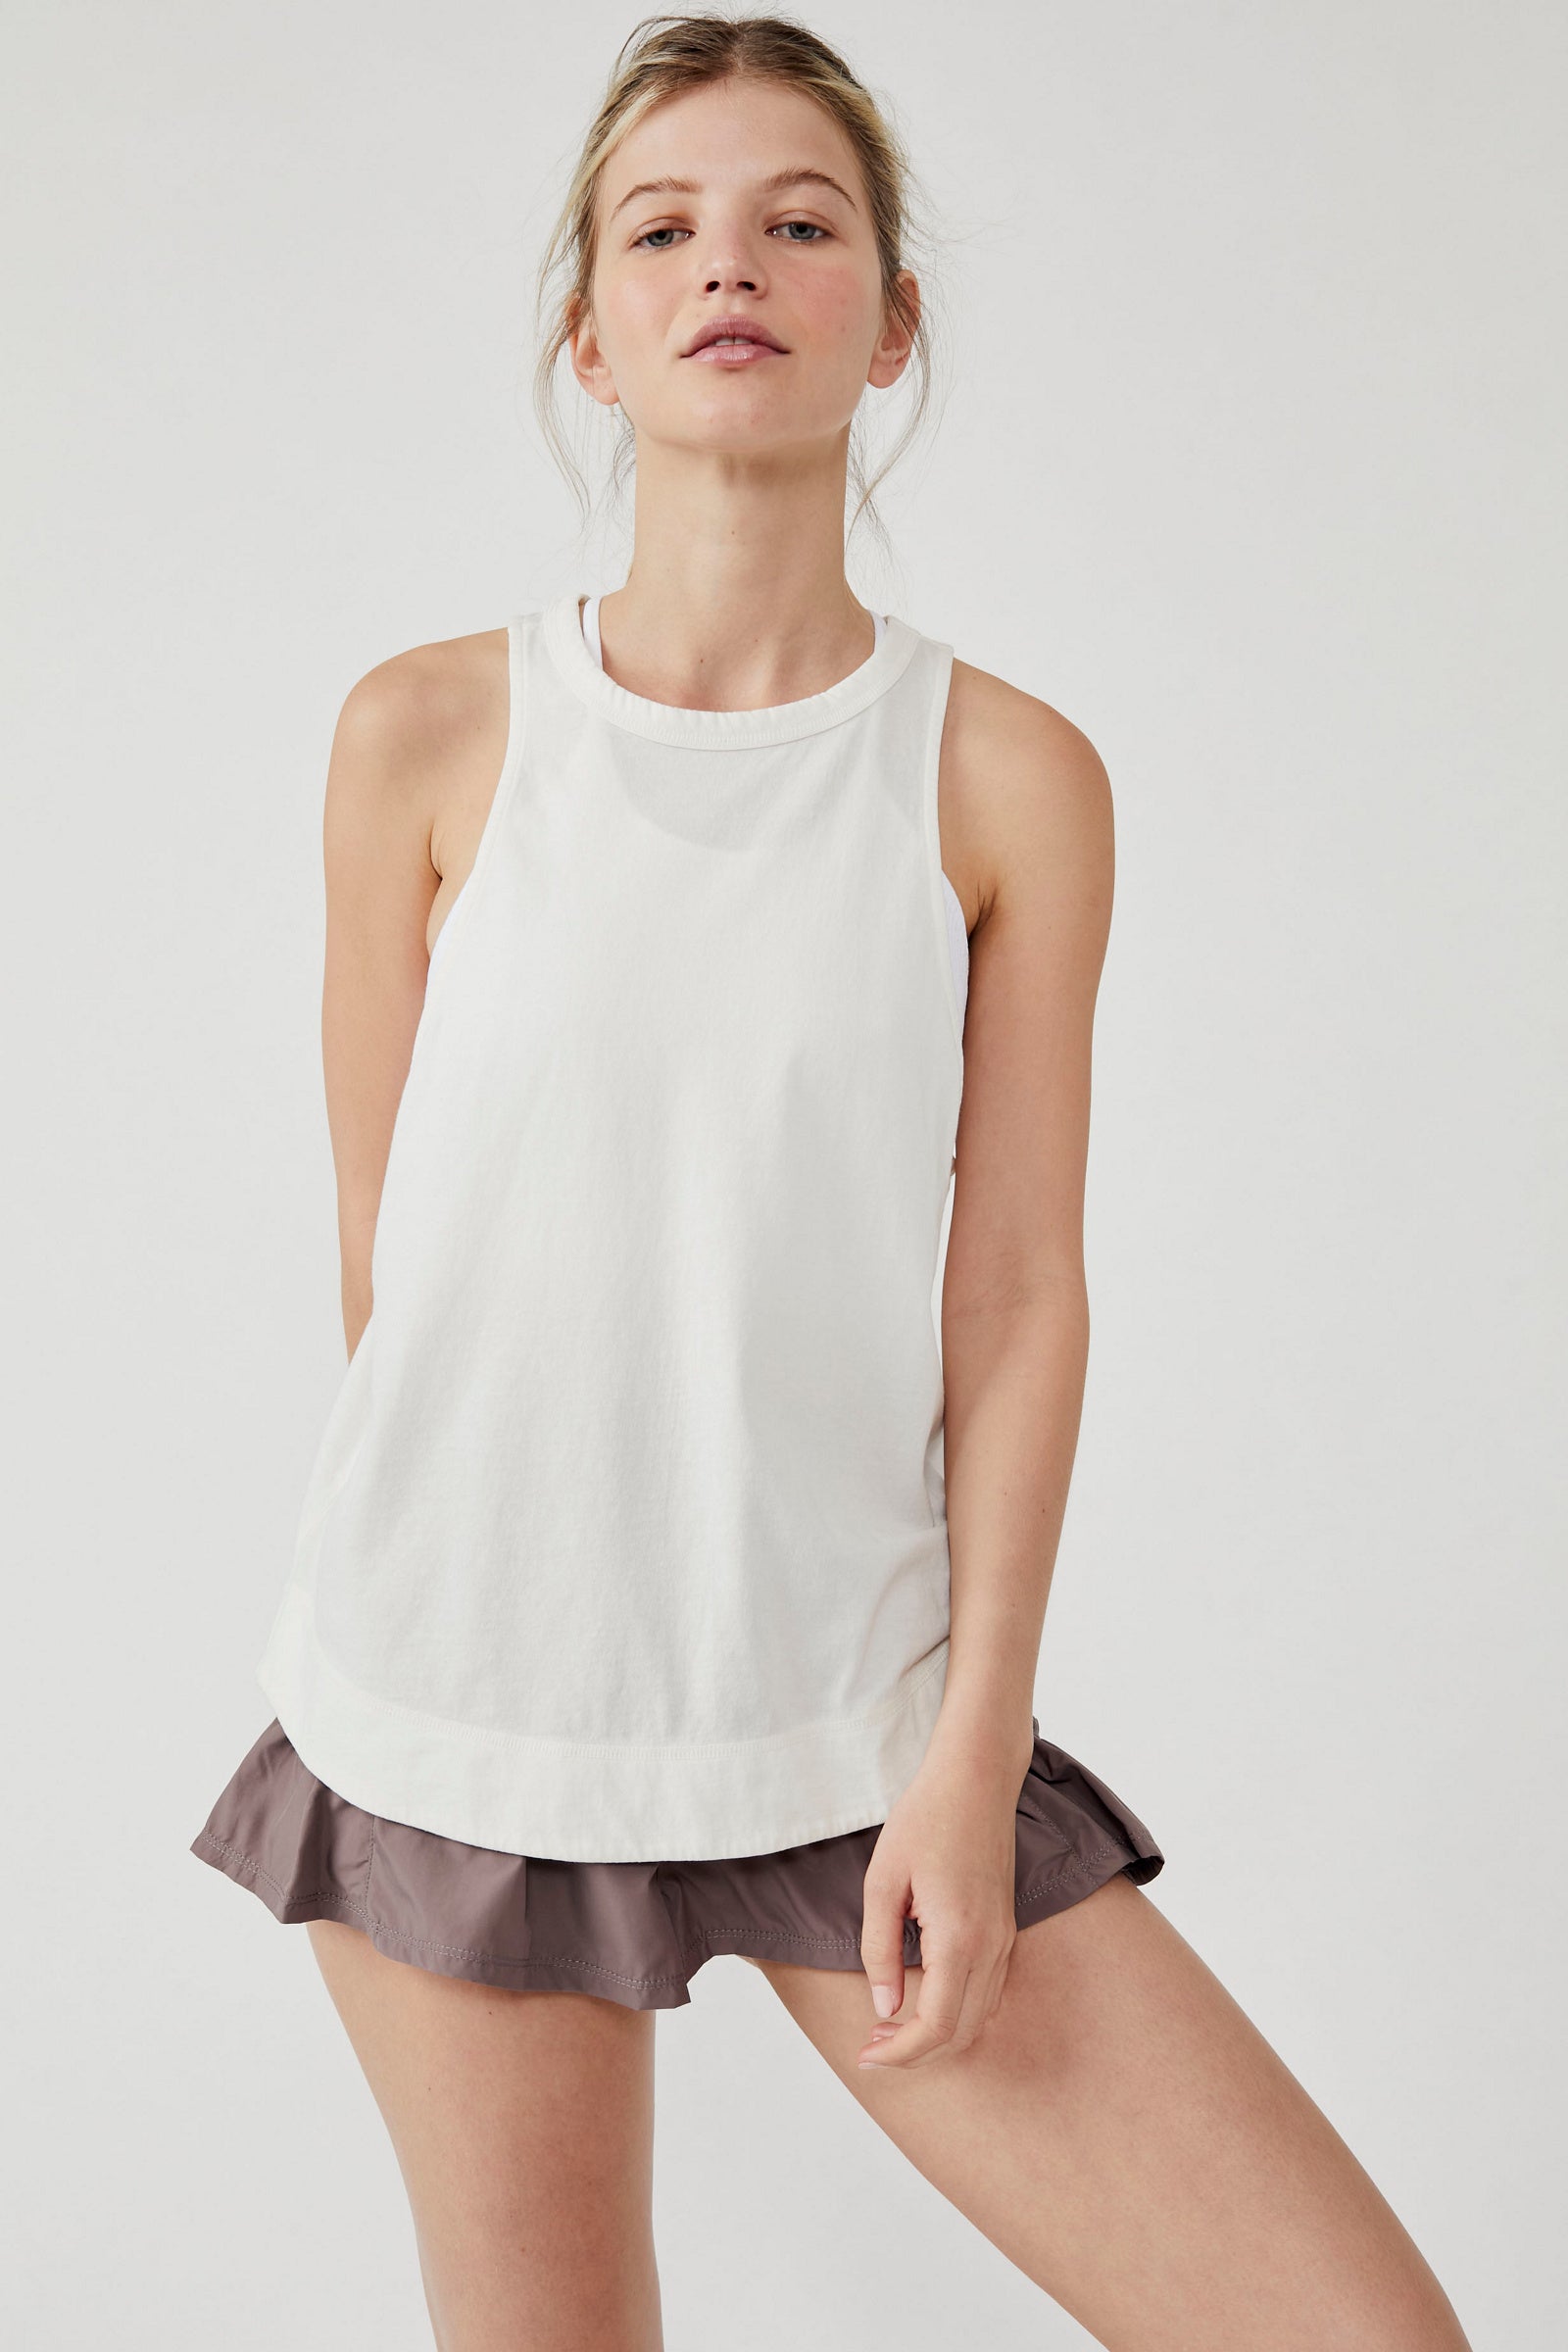 FREE PEOPLE INHALE TANK SOLID IN PAINTED WHITE